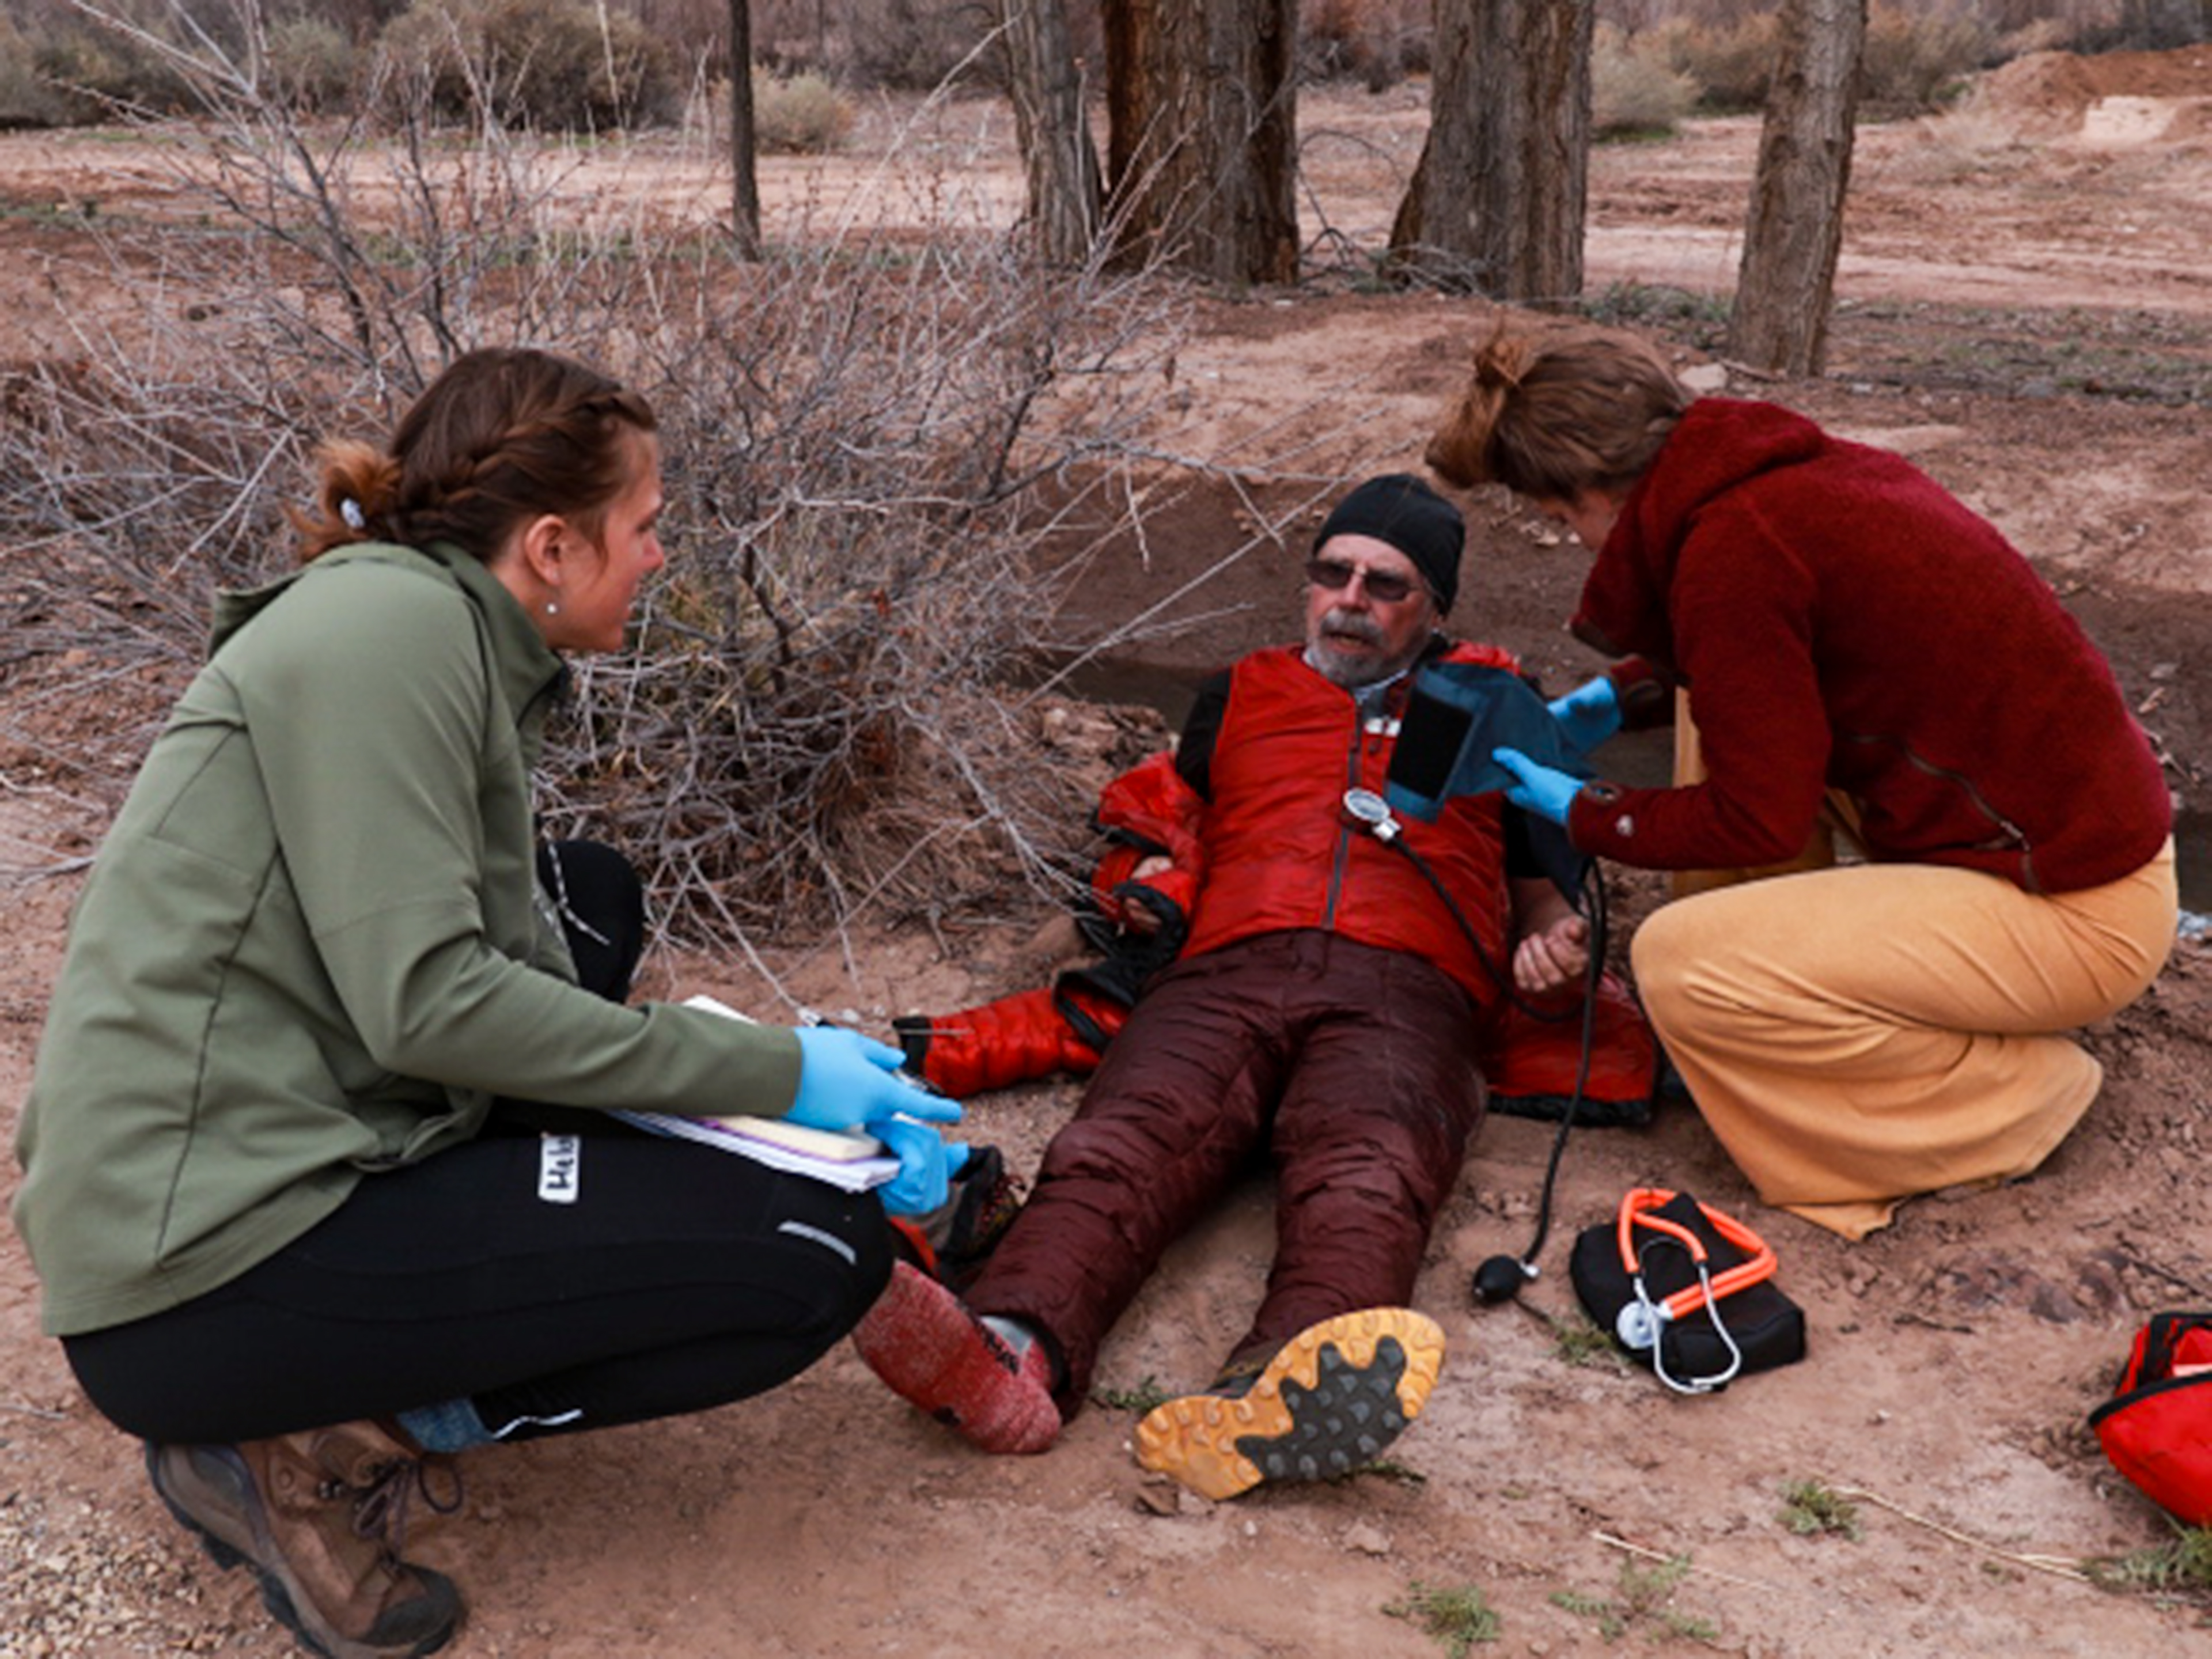 Two female rescuers kneel next to an older who is sitting on the dirt. One takes his blood pressure.